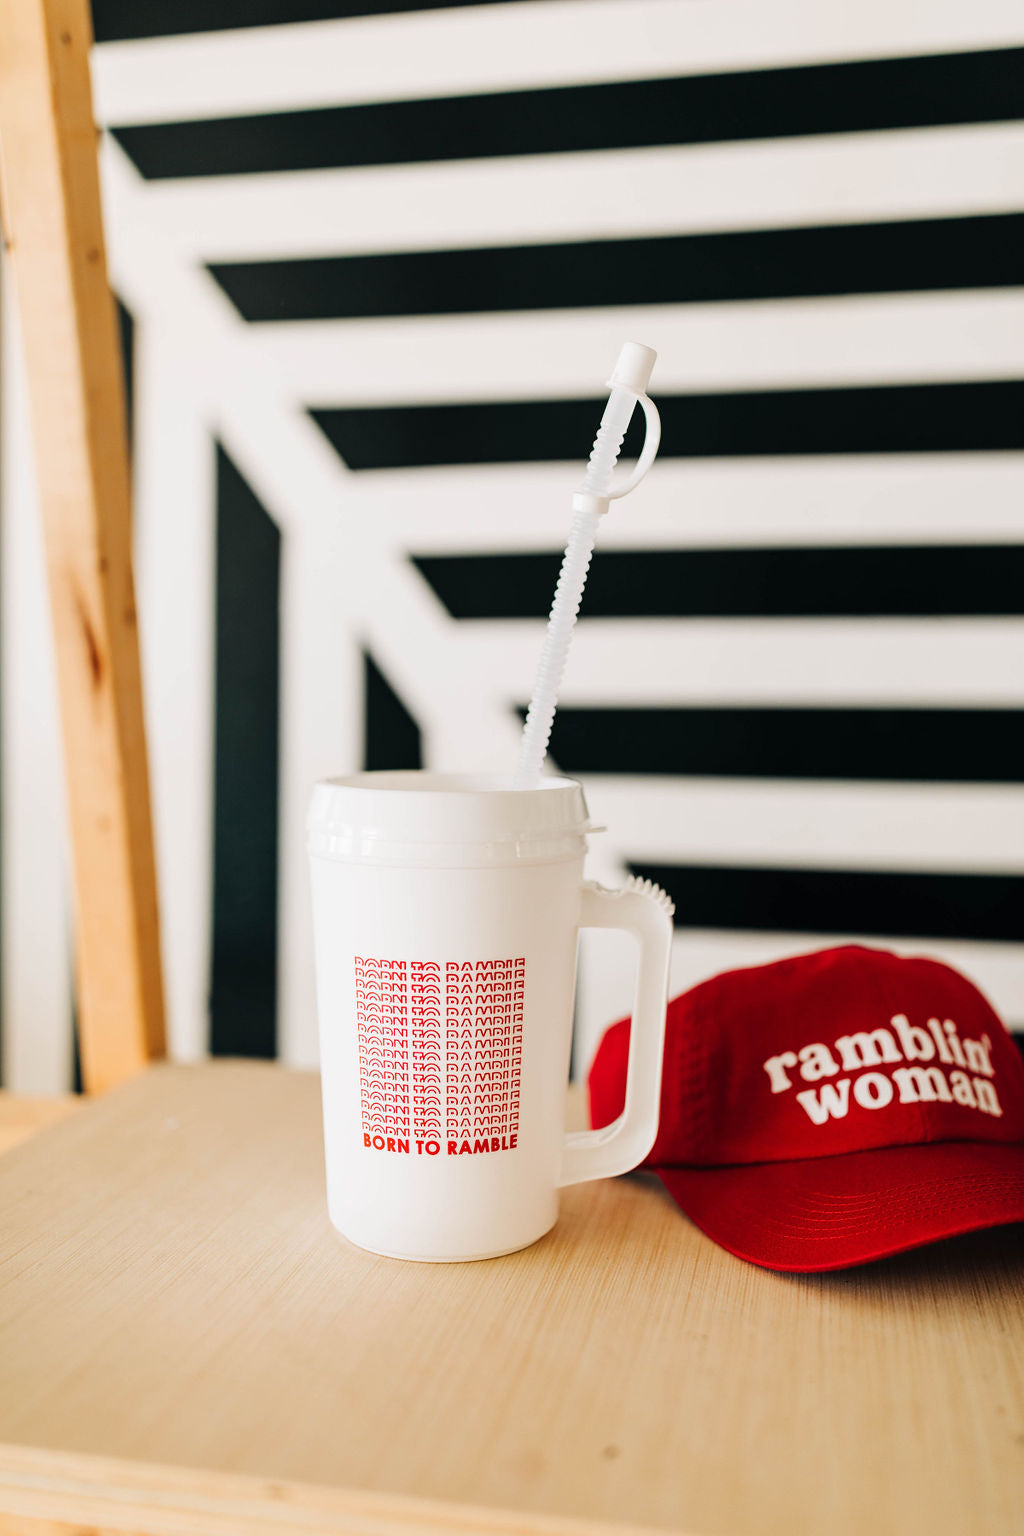 22 oz double insulated, white cup with born to ramble written in a red design | dishwasher safe | includes lid and straw || you can shop now at  shop.rambleandcompany.com or visit our storefront in downtown Wichita Falls, Texas || small batch + hand printed tees | home goods | paper goods | gifts + more